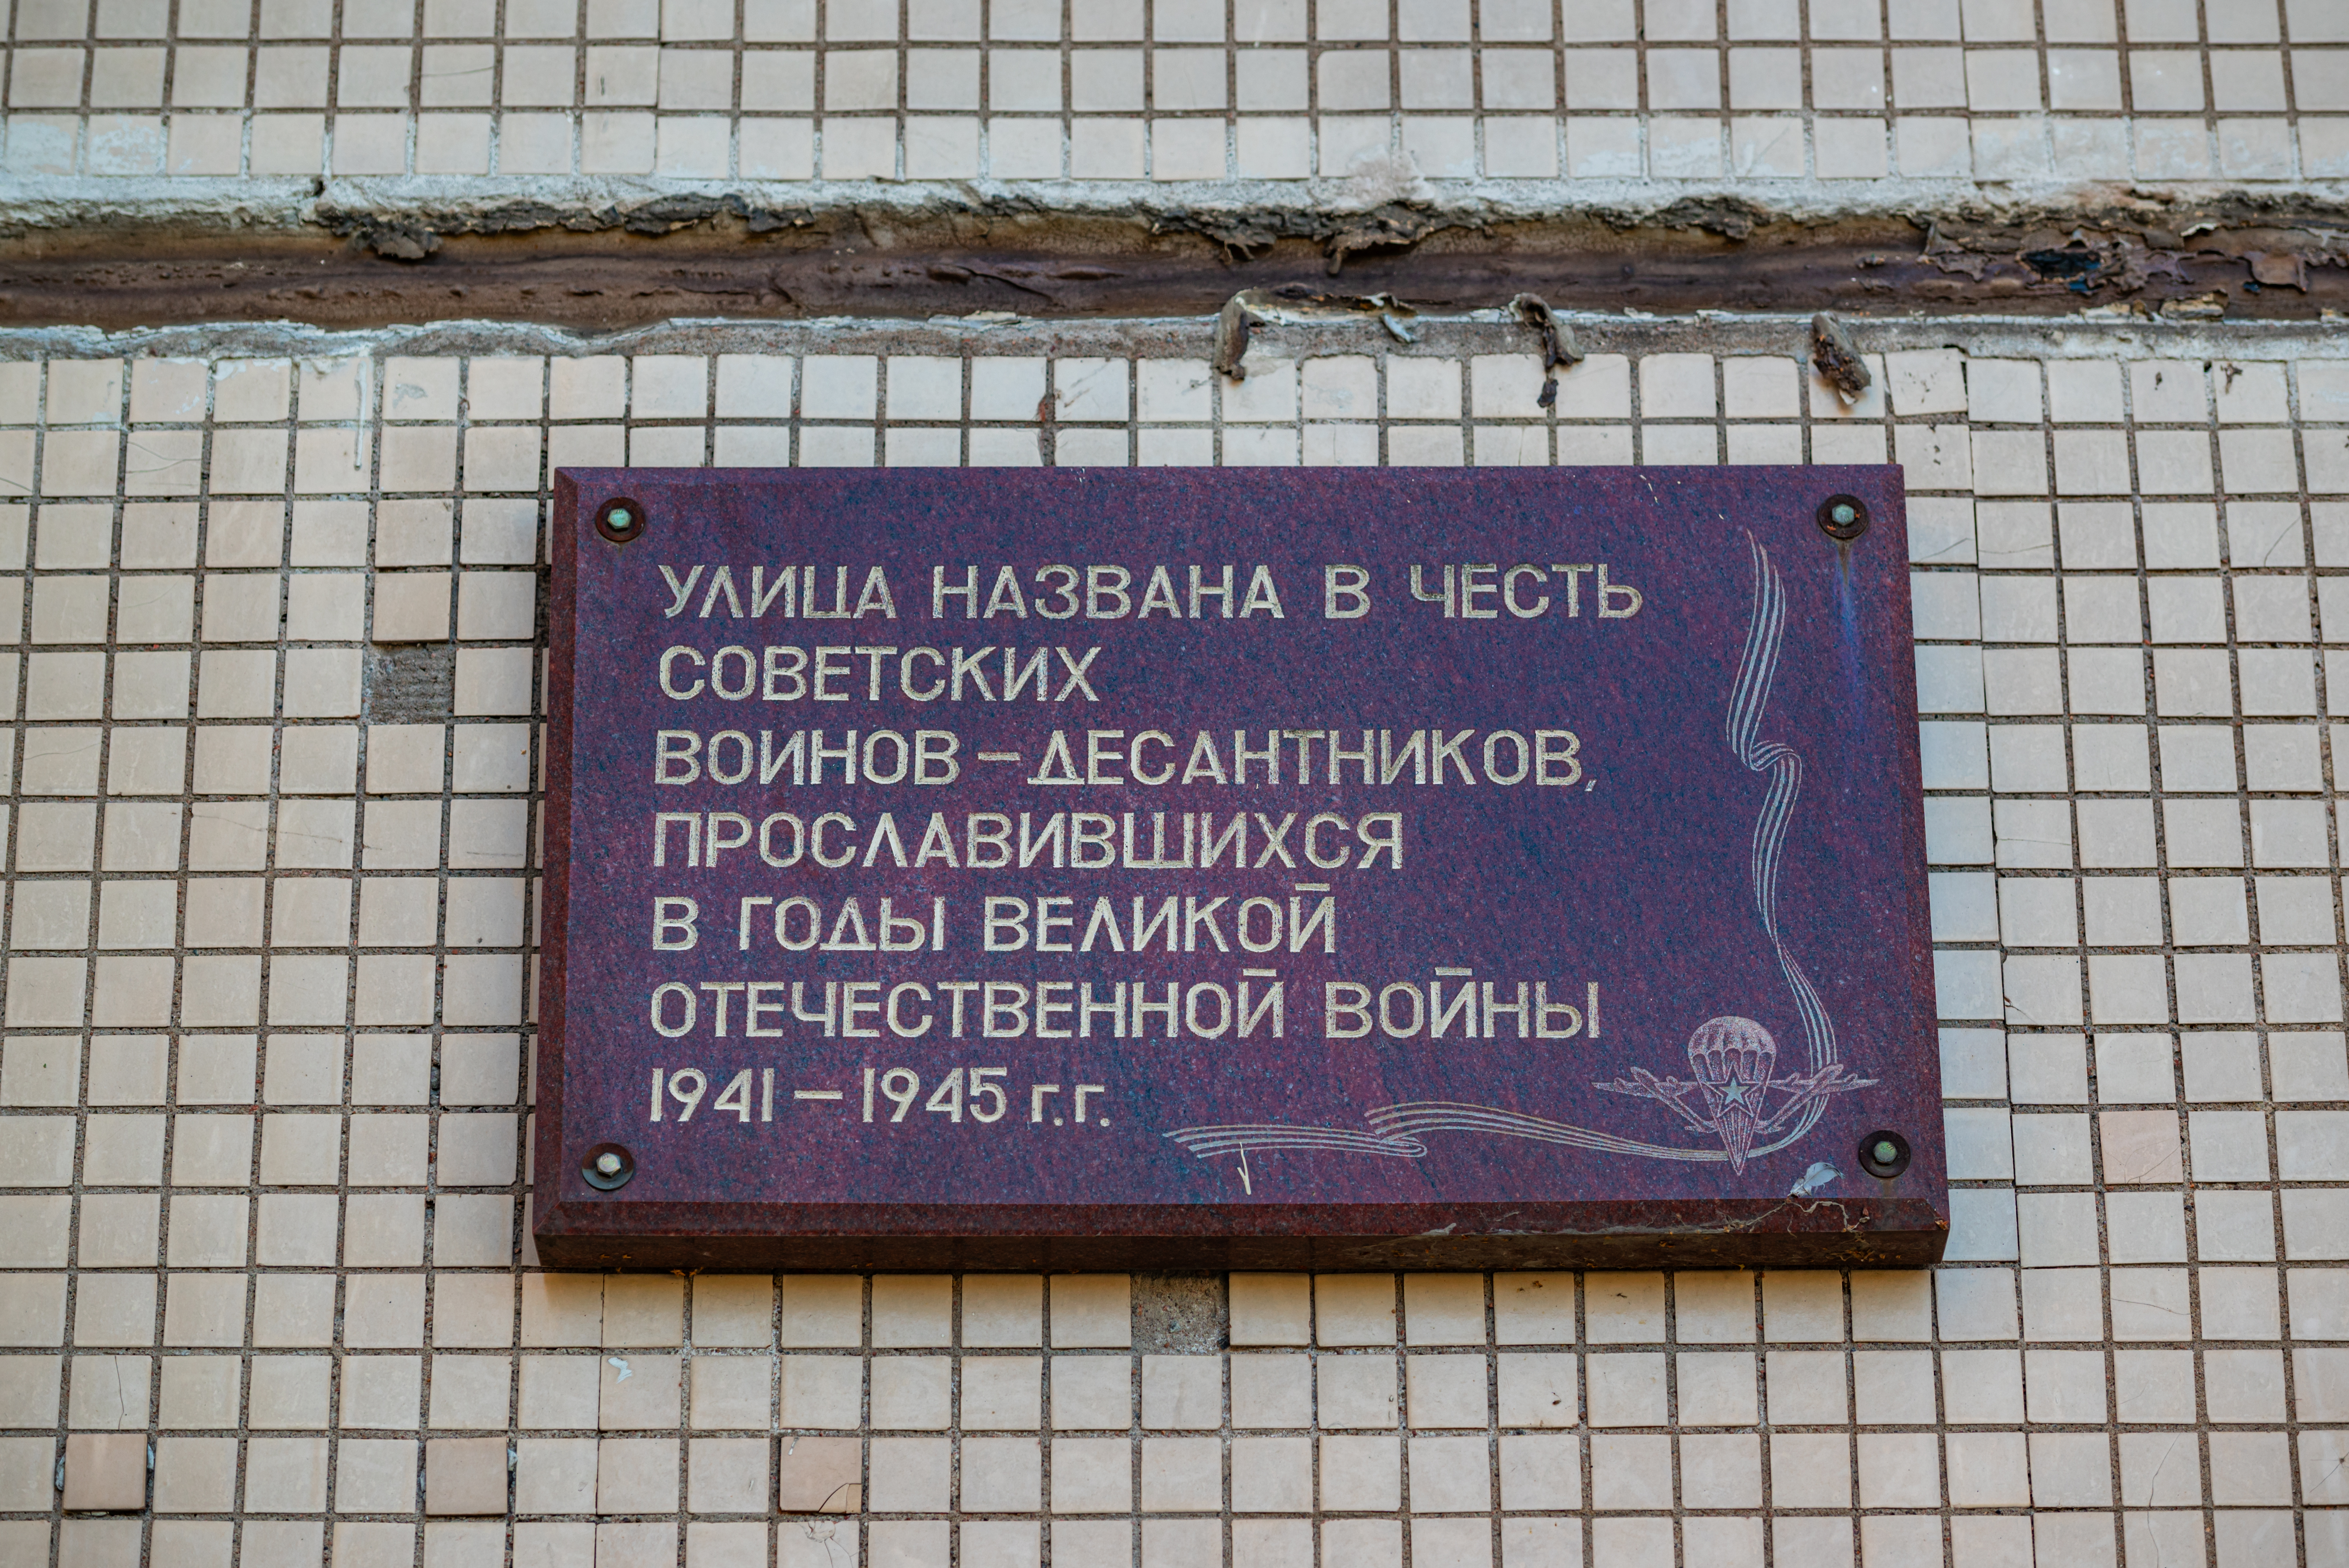 A memorial plaque to the Paratrooper Soldiers who became famous during the Great Patriotic War